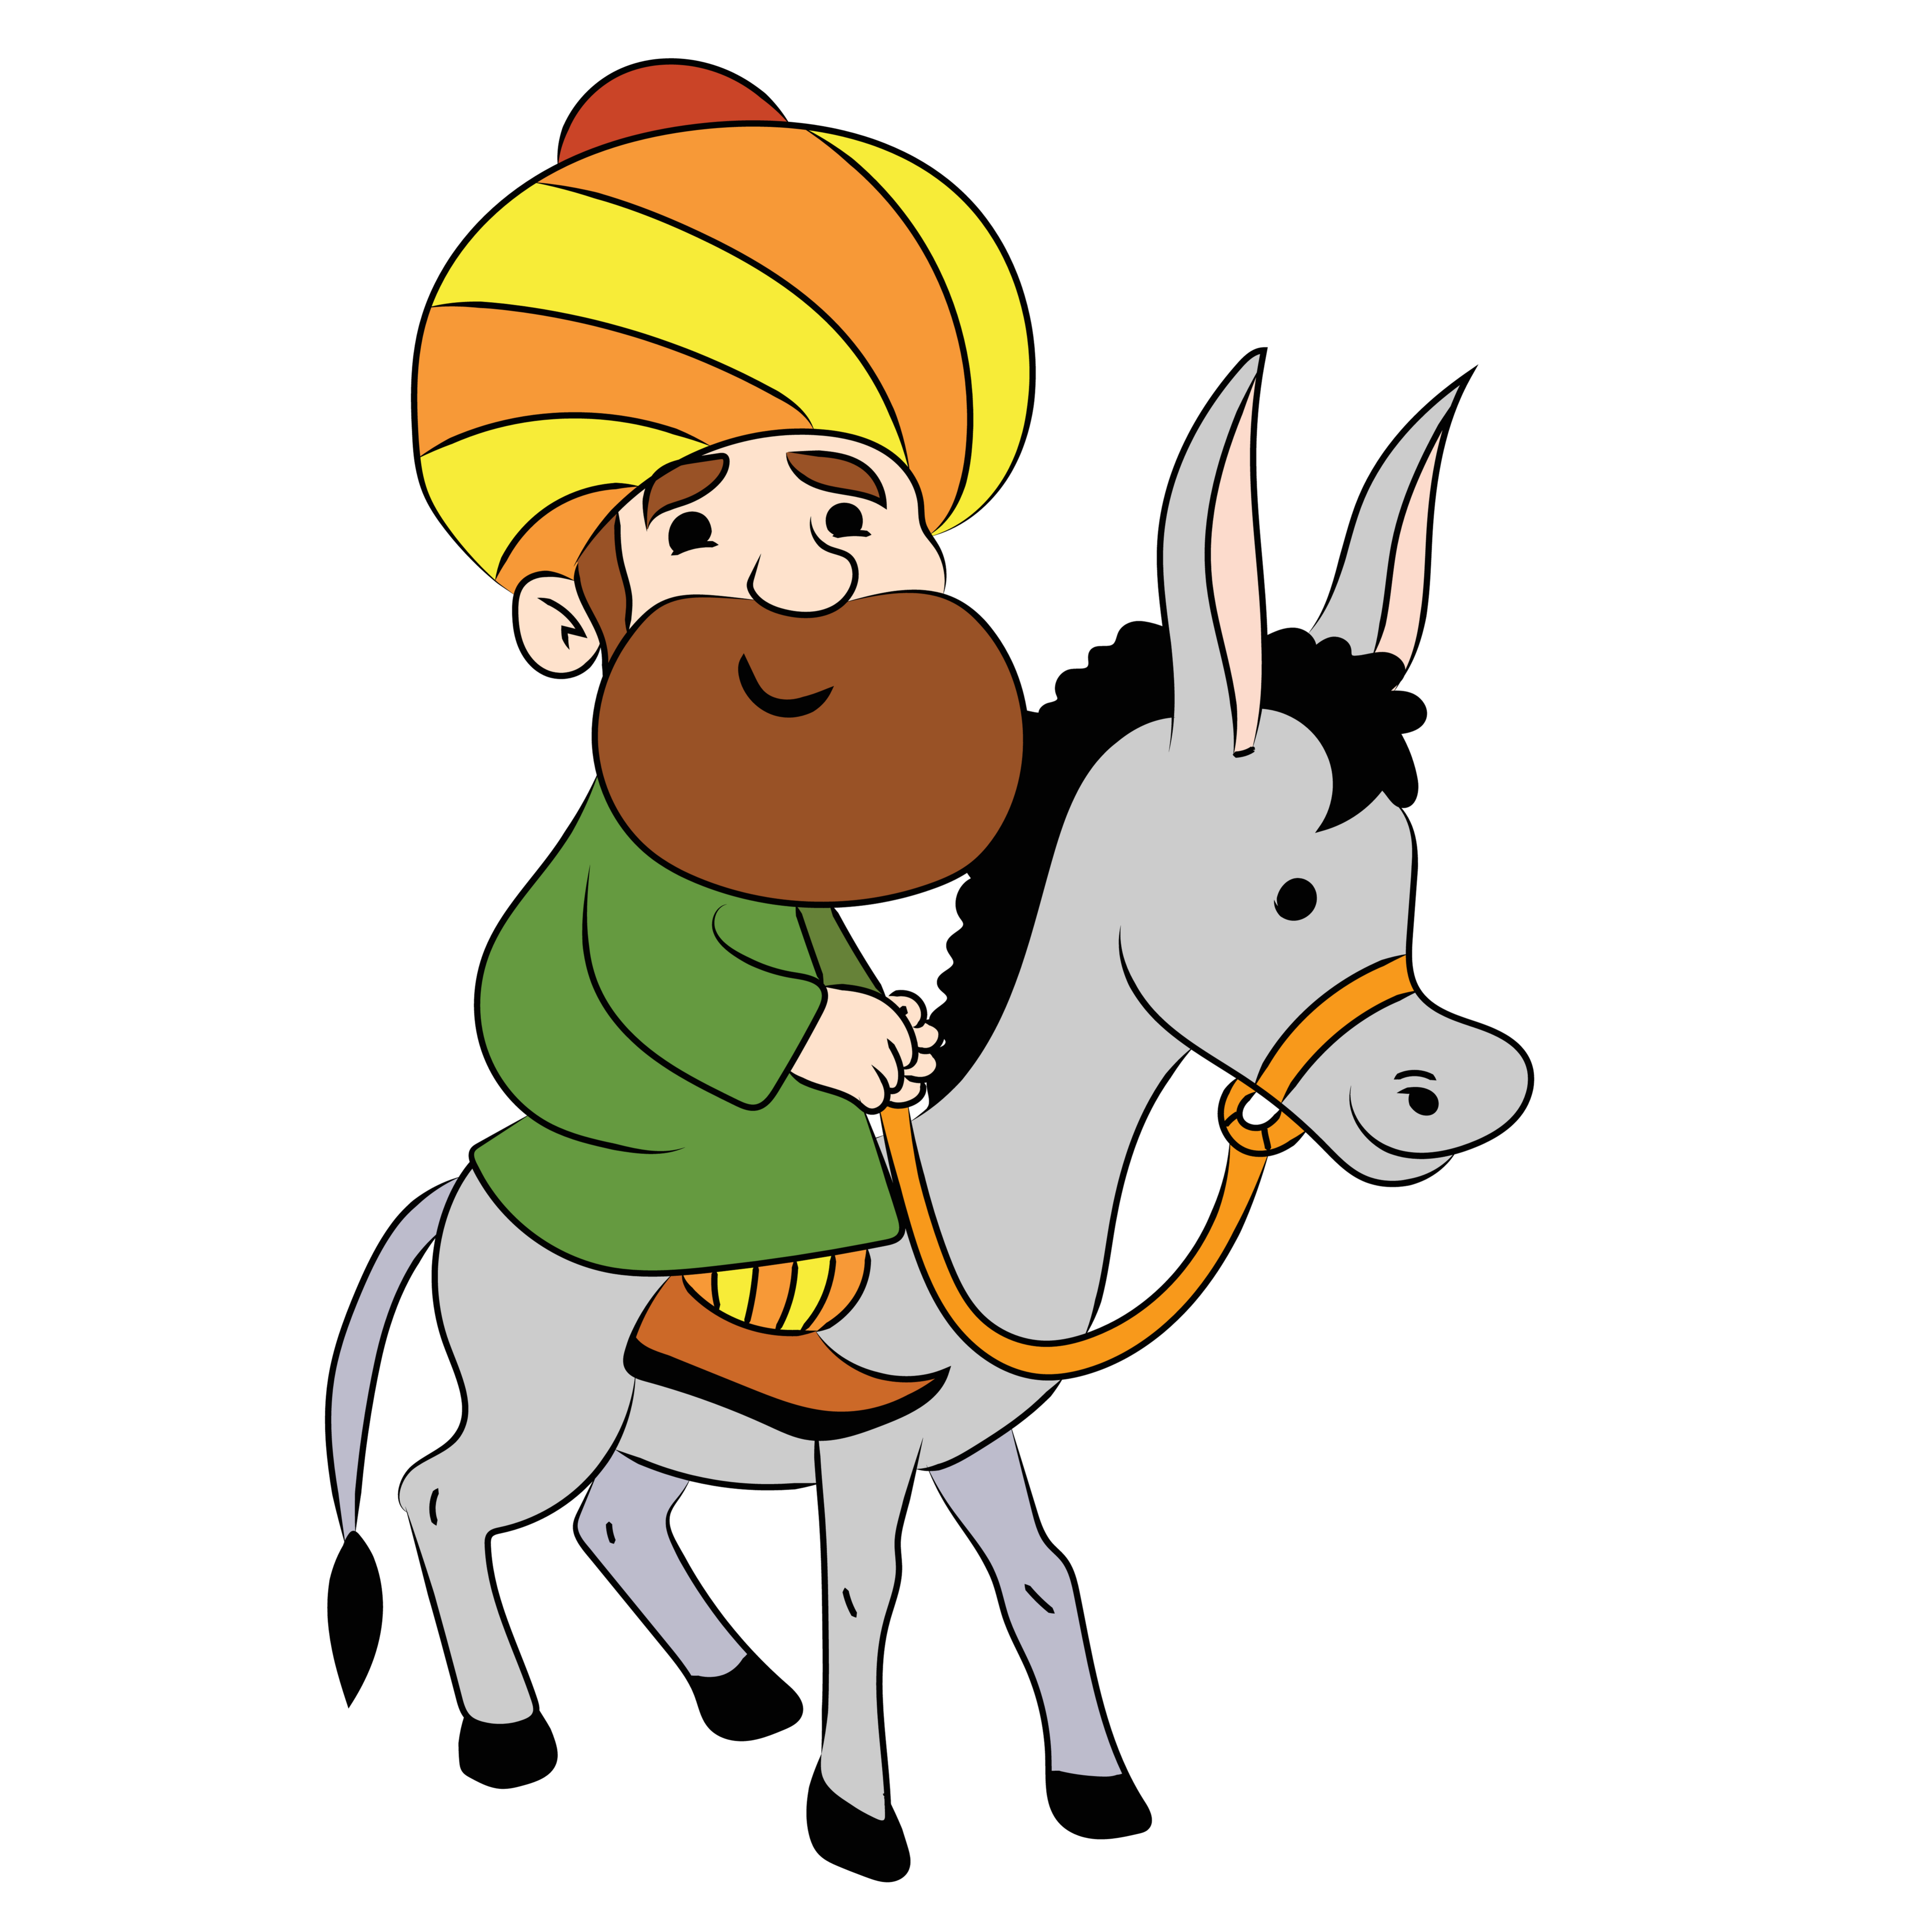 Funny jokes of Juha are the essence of Middle Eastern humor. But why is that? Find out more with Kaleela on the Arab folklore of Juha and his Donkey.